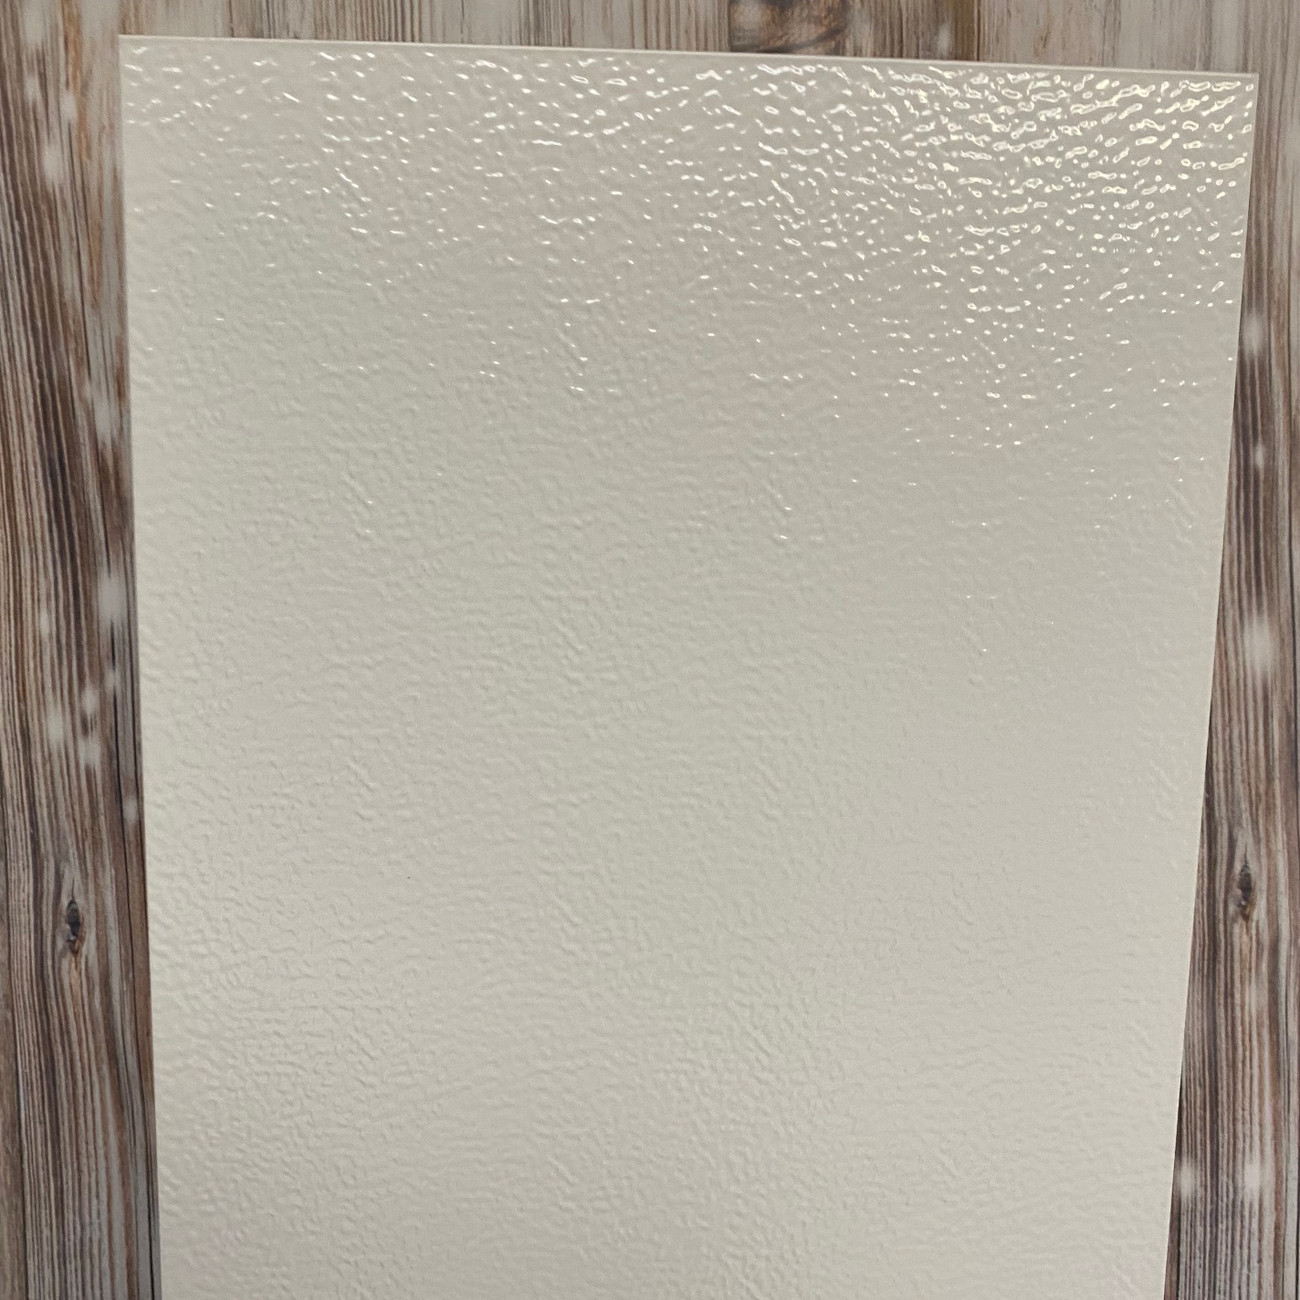 White  - This can be used as a Kick plate or a Push Plate on a Nova door. Using this protects the mesh when opening the door. Suitable for indoor and outdoor use in high traffic areas.